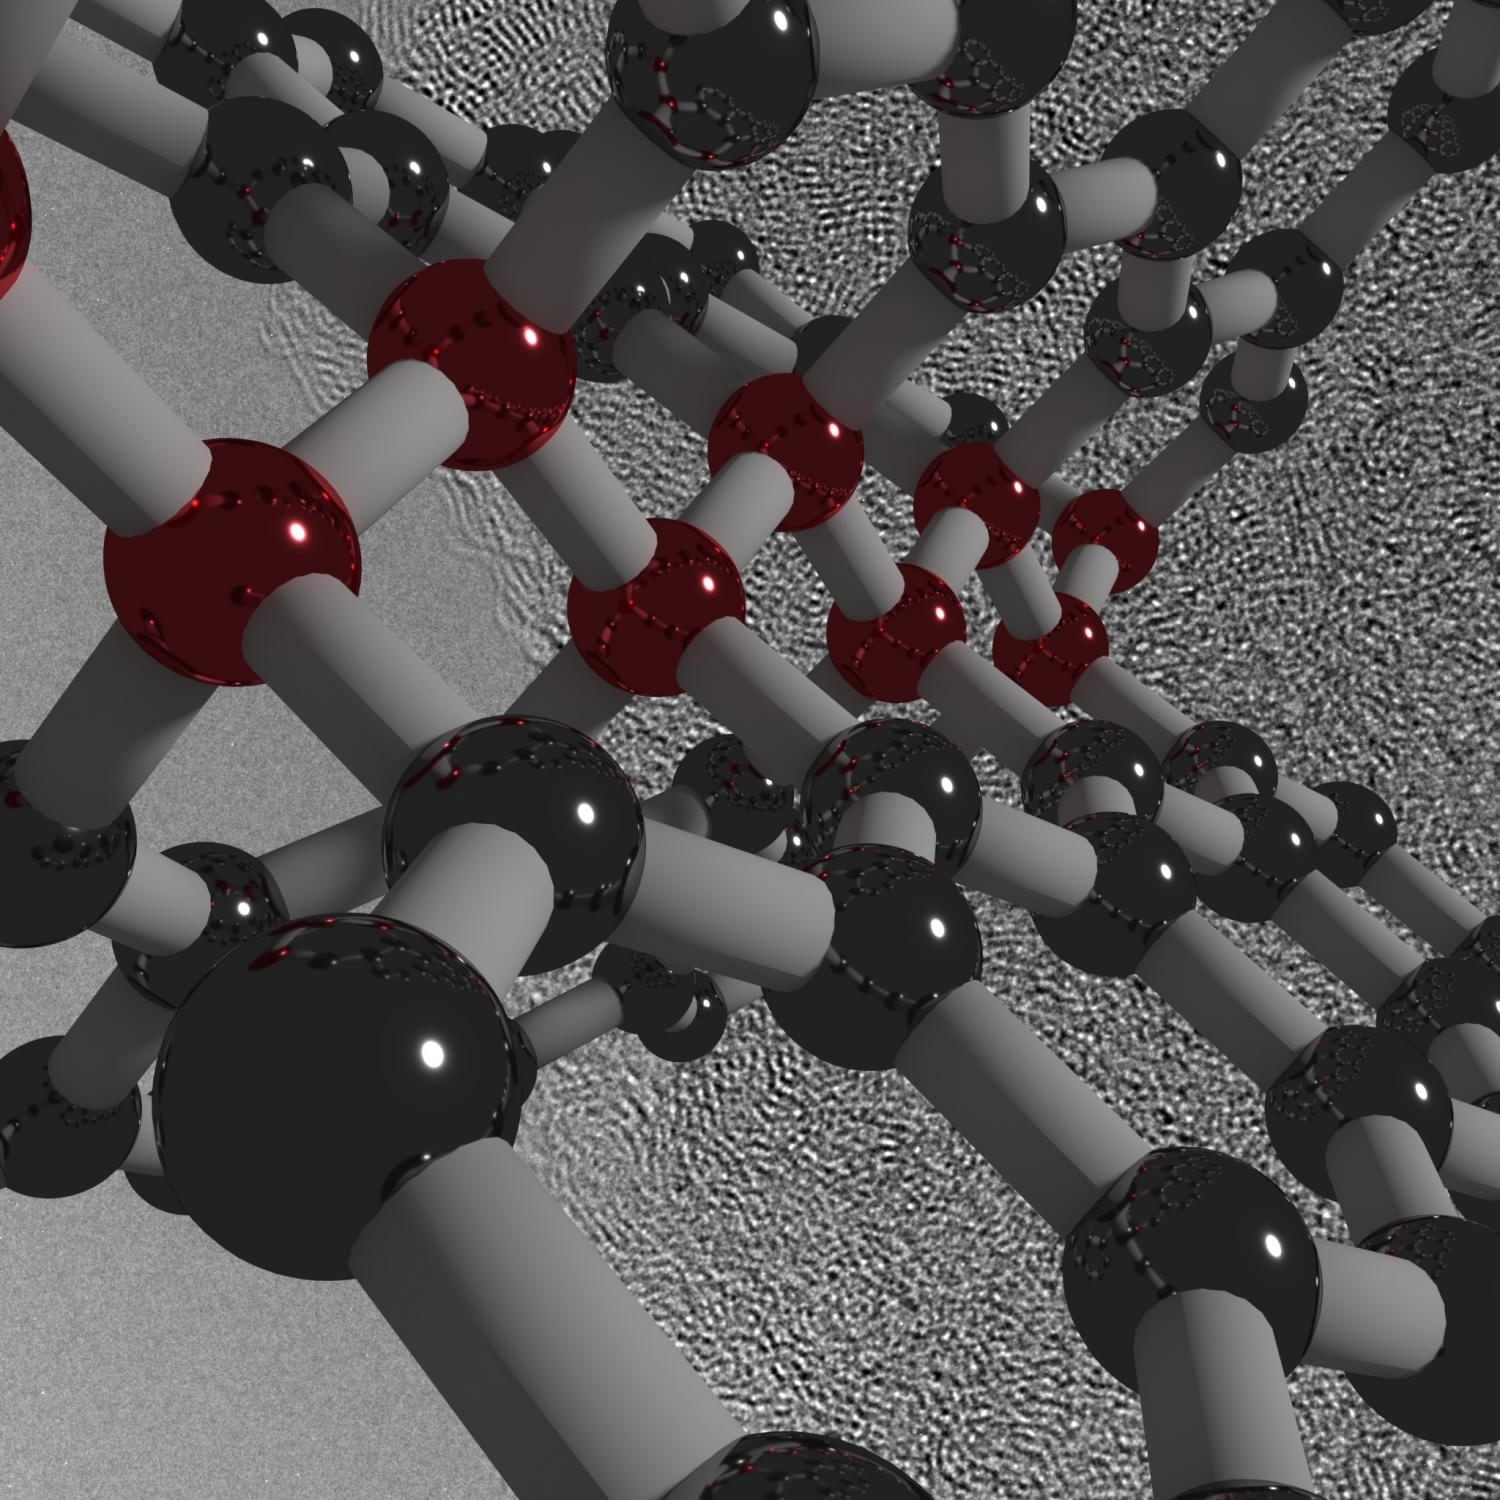 Elastic yet hard as diamond: Scientists develop new carbon f